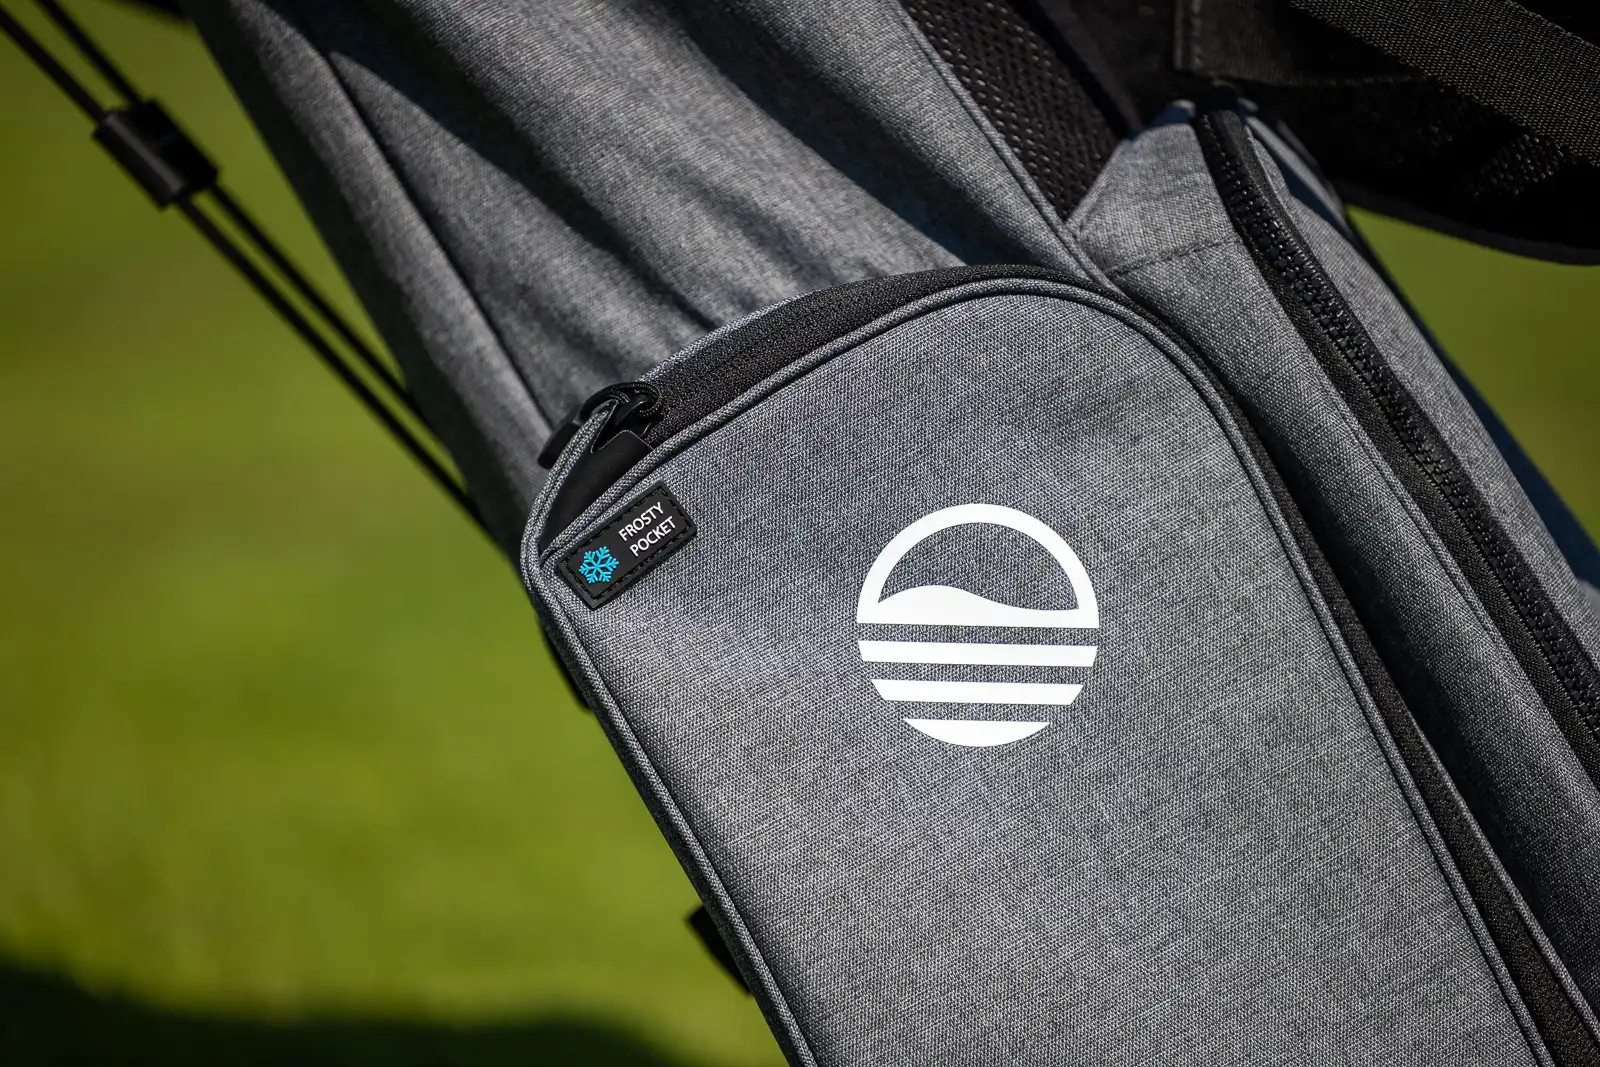 Sunday Golf Bags - Use code "BE15" to save 15%!